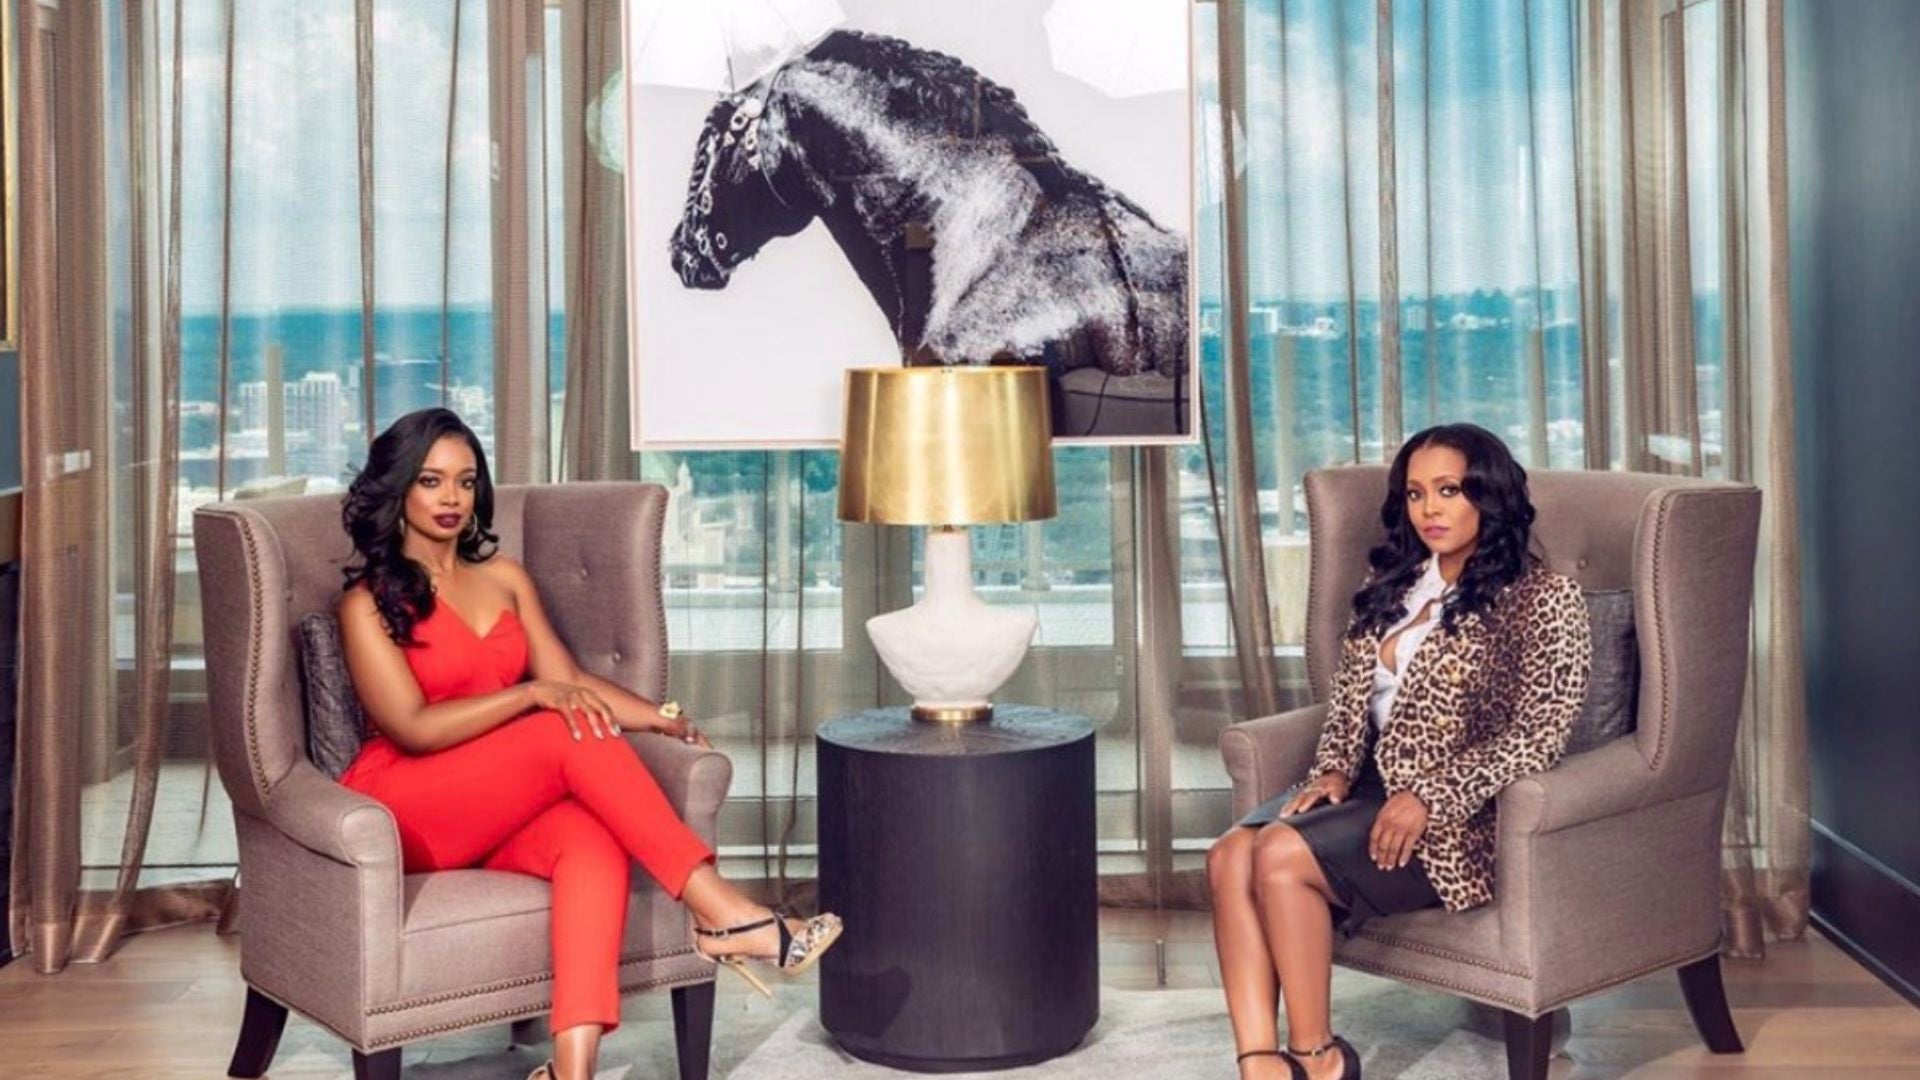 Keisha Knight Pulliam & Arian Simone Are Investing $5 Million Dollars In Black Women-Owned Businesses